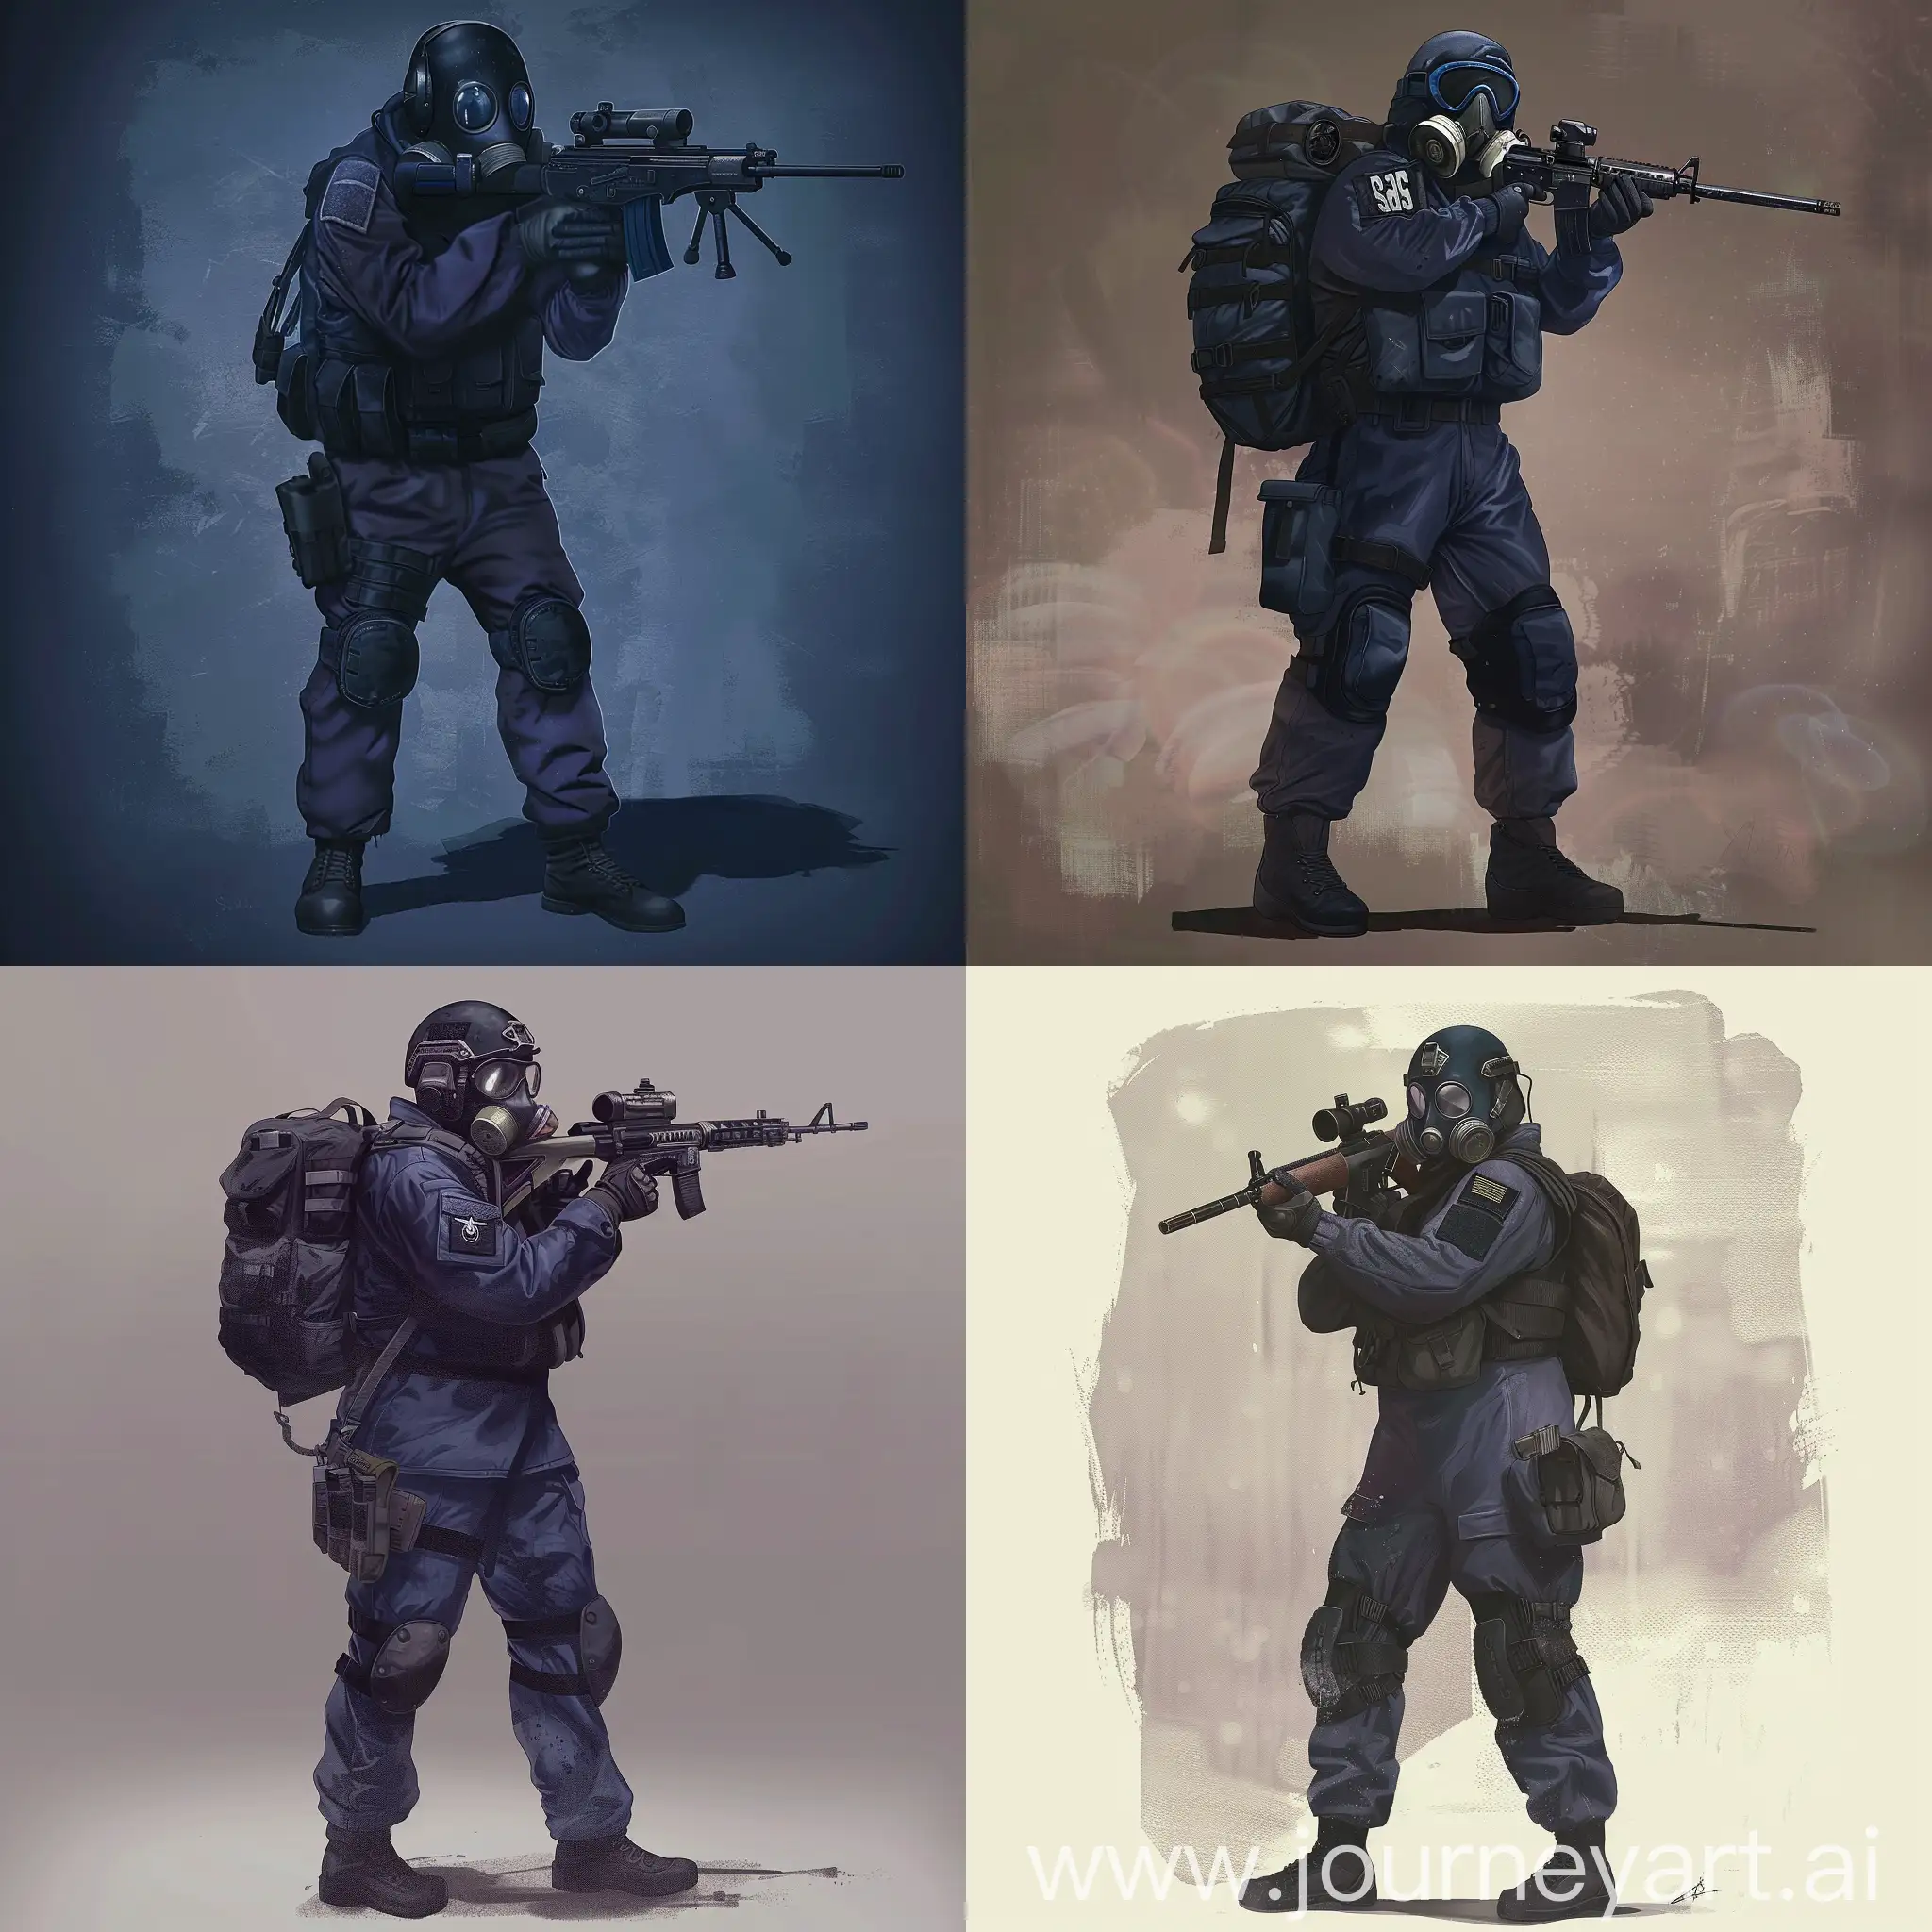 SAS-Operator-in-Dark-Purple-Military-Jumpsuit-with-Gas-Mask-and-Sniper-Rifle